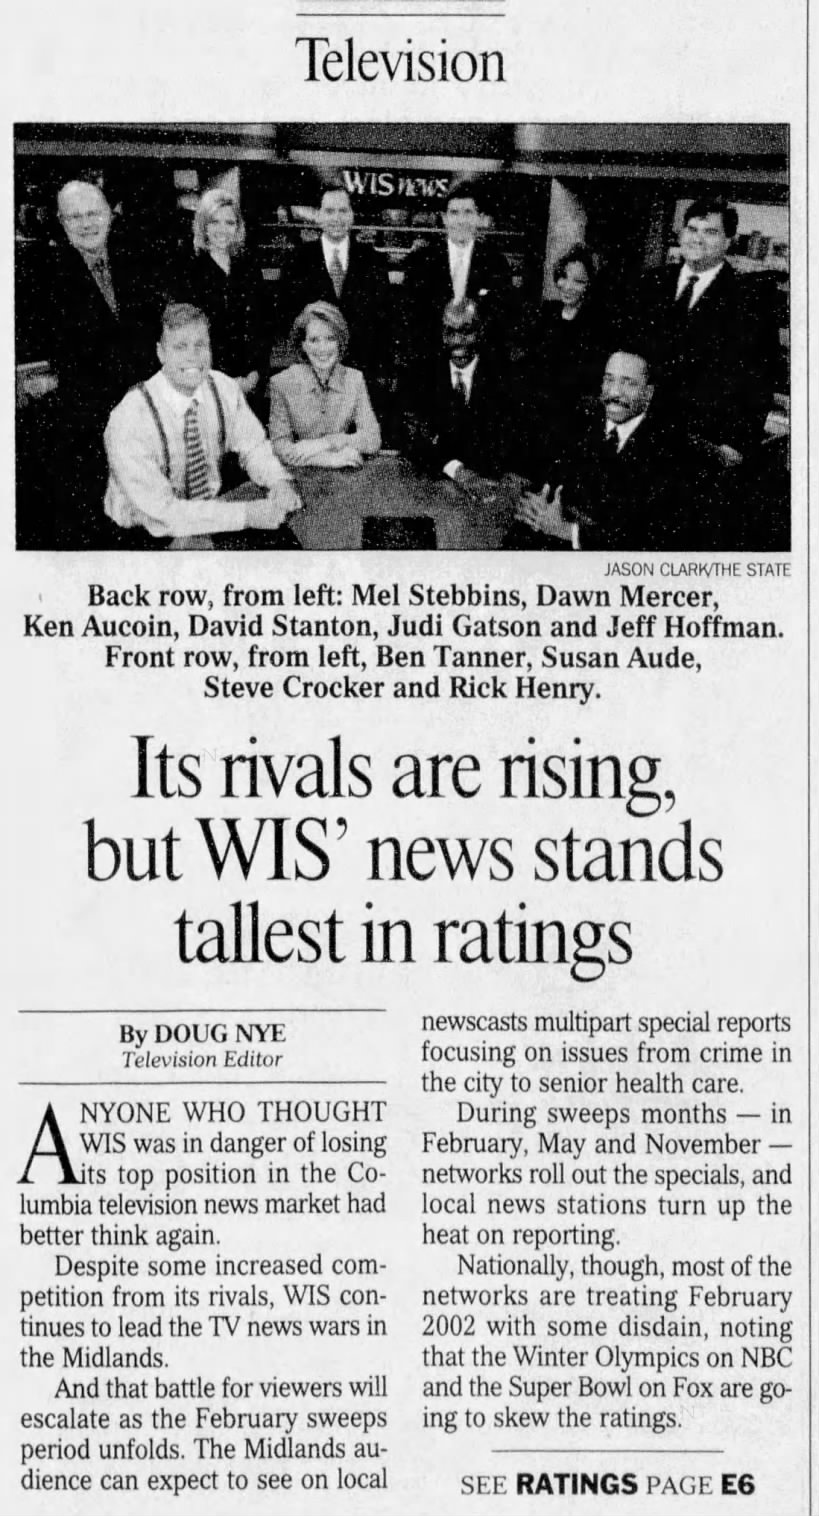 Its rivals are rising, but WIS' news stands tallest in ratings